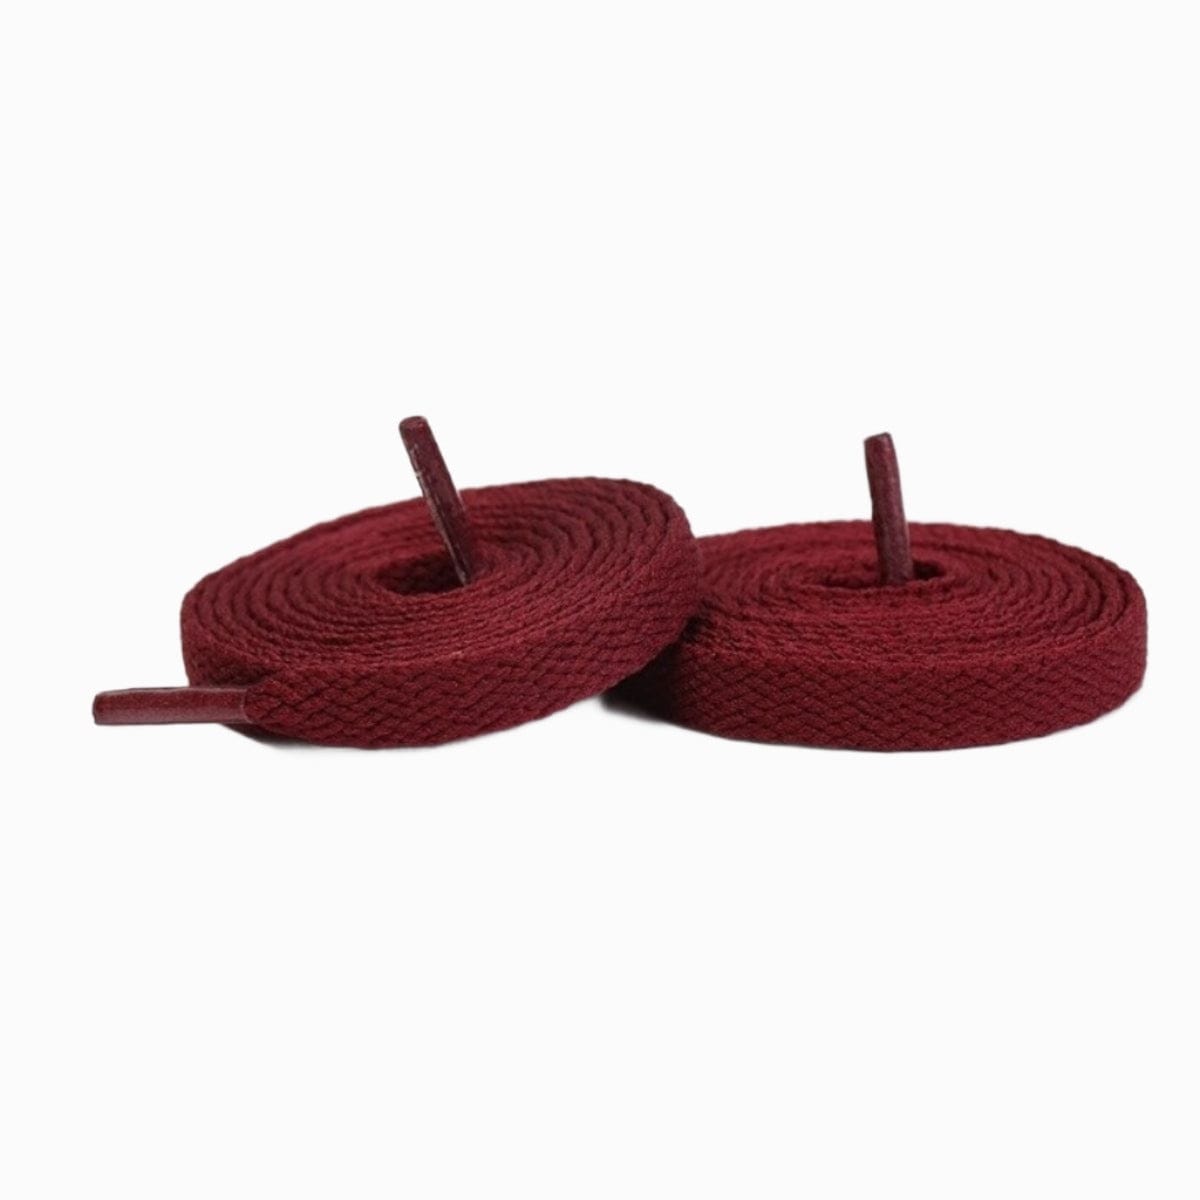 Wine Red Replacement Shoe Laces for Adidas Handball Spezial Sneakers by Kicks Shoelaces